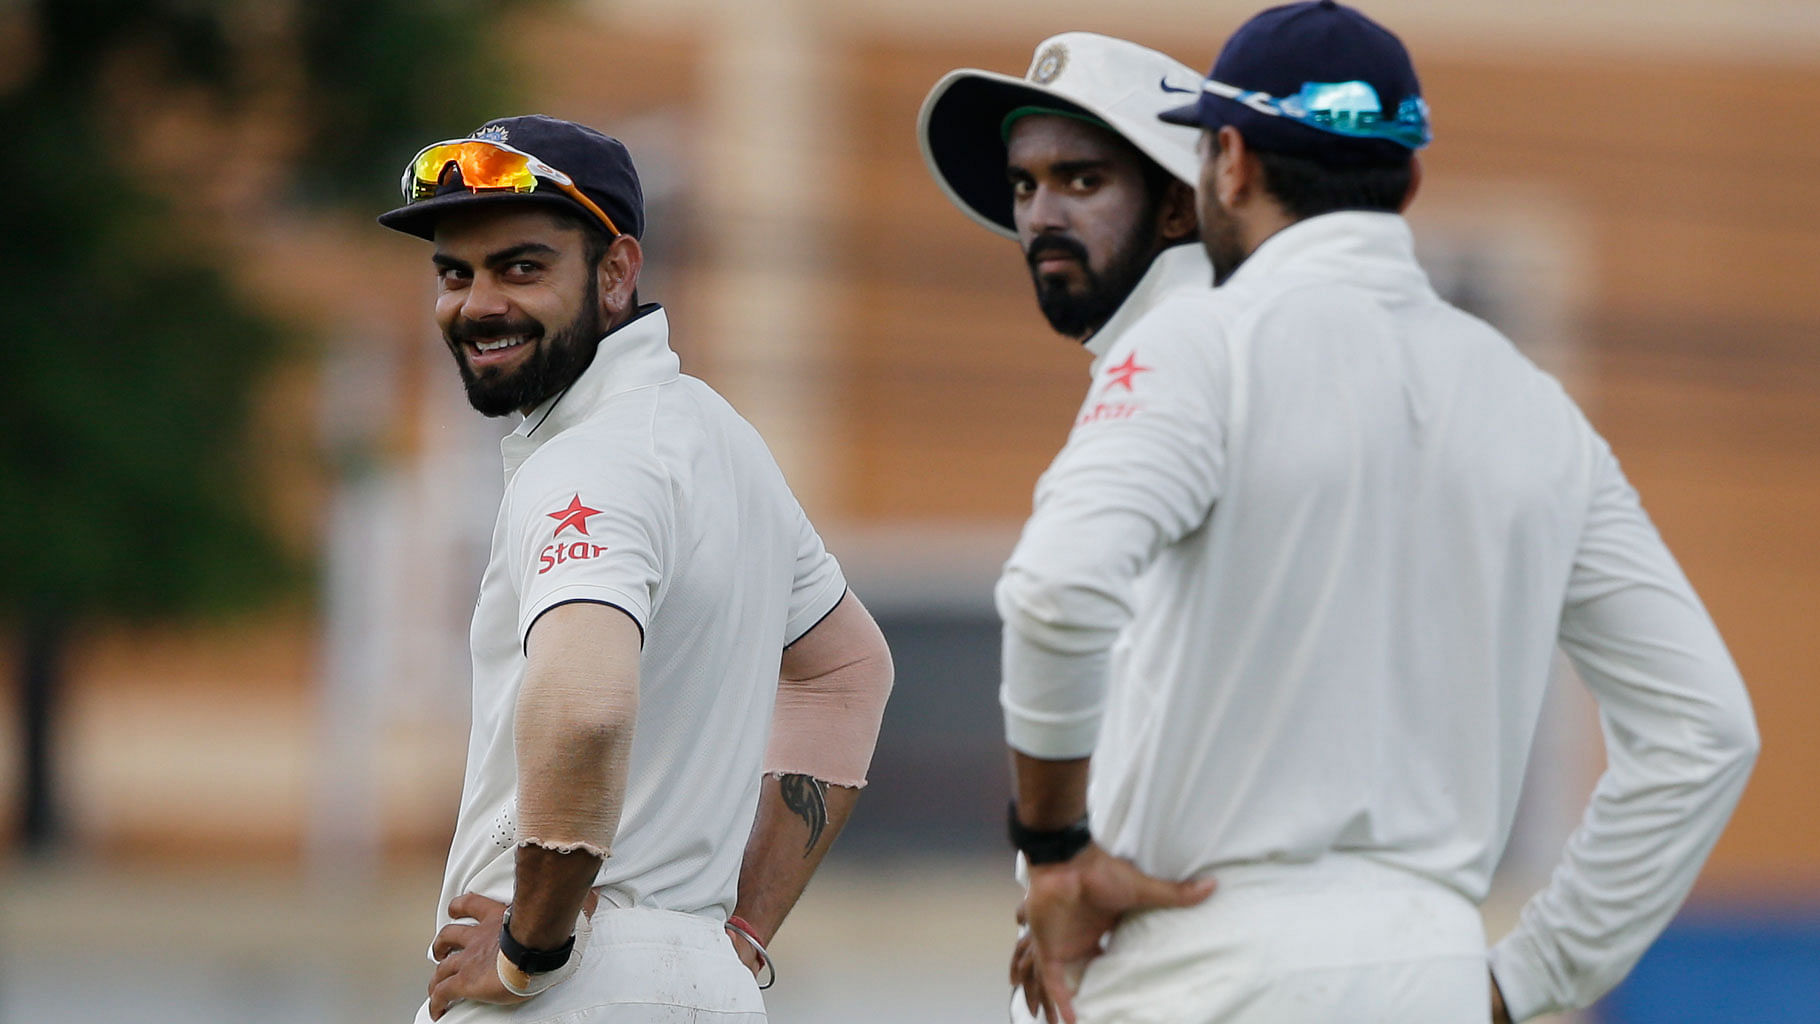 Indian Test Captain Virat Kohli will look for redemption when England will tour India later this year.